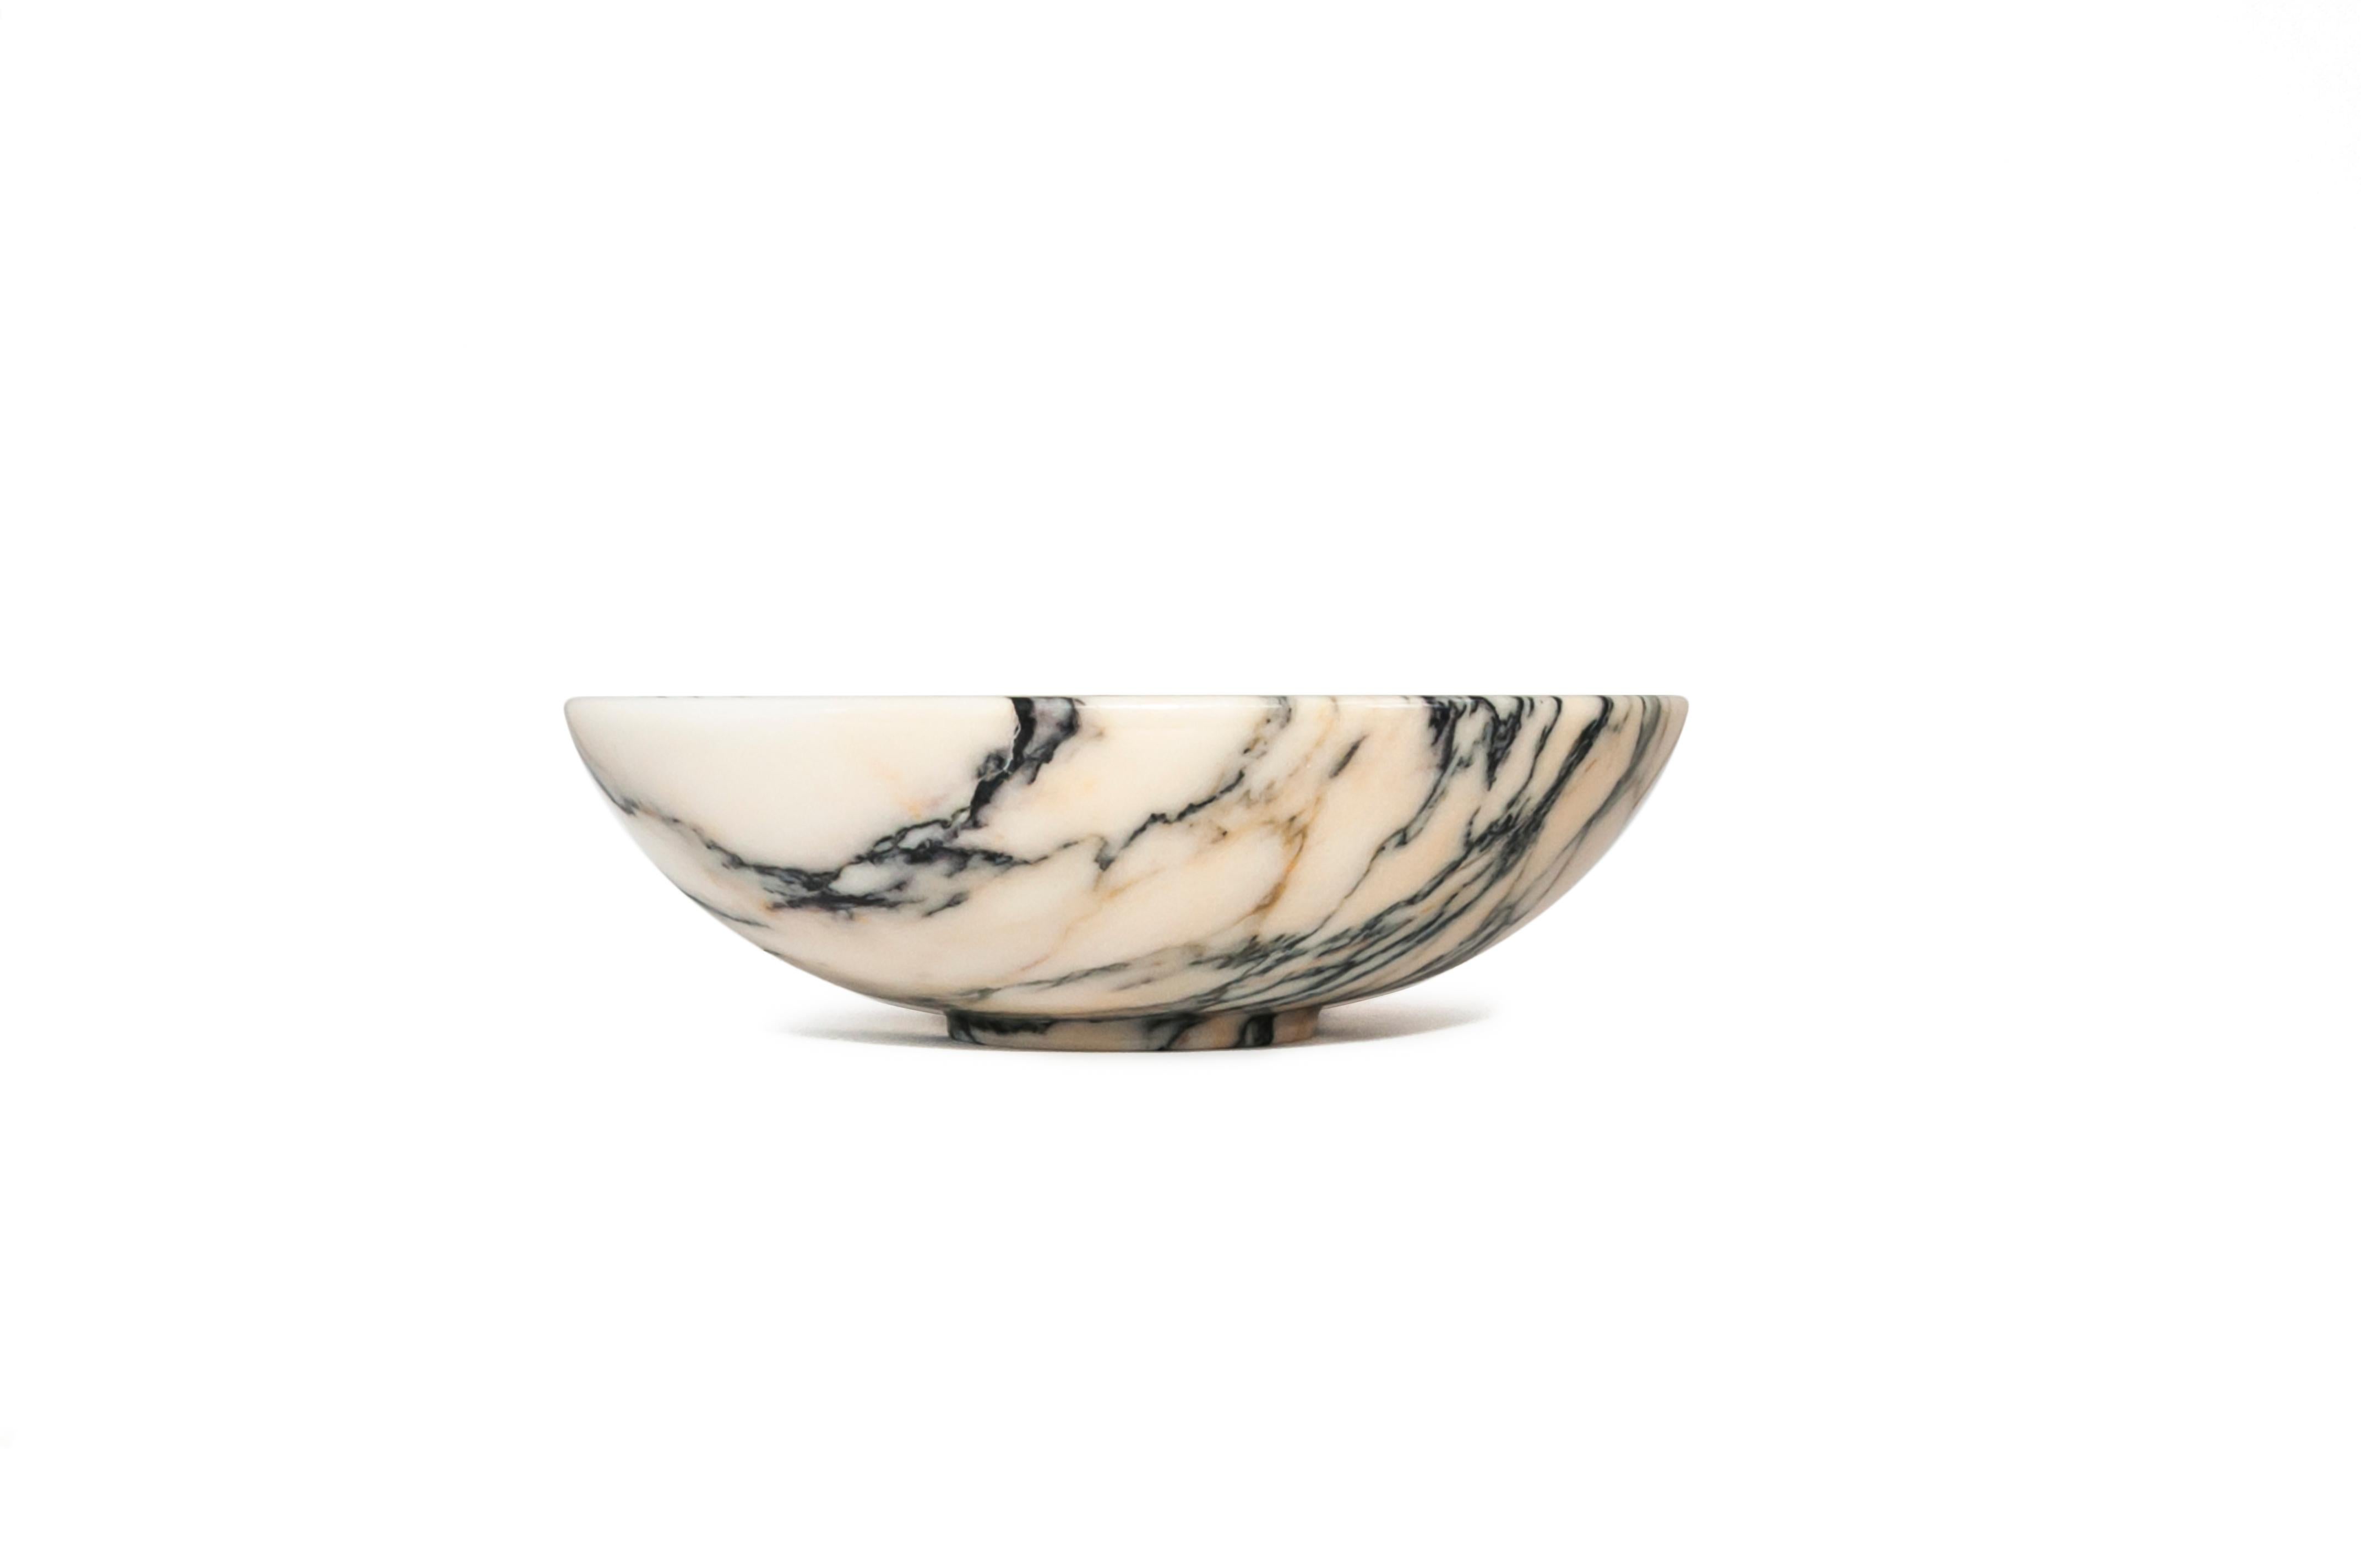 Small fruit bowl in Paonazzo marble, extracted and processed in Carrara, Italy. You have a 100% made in Italy product.
It is ideal for fruit and to present food.
Each piece is in a way unique (since each marble block is different in veins and